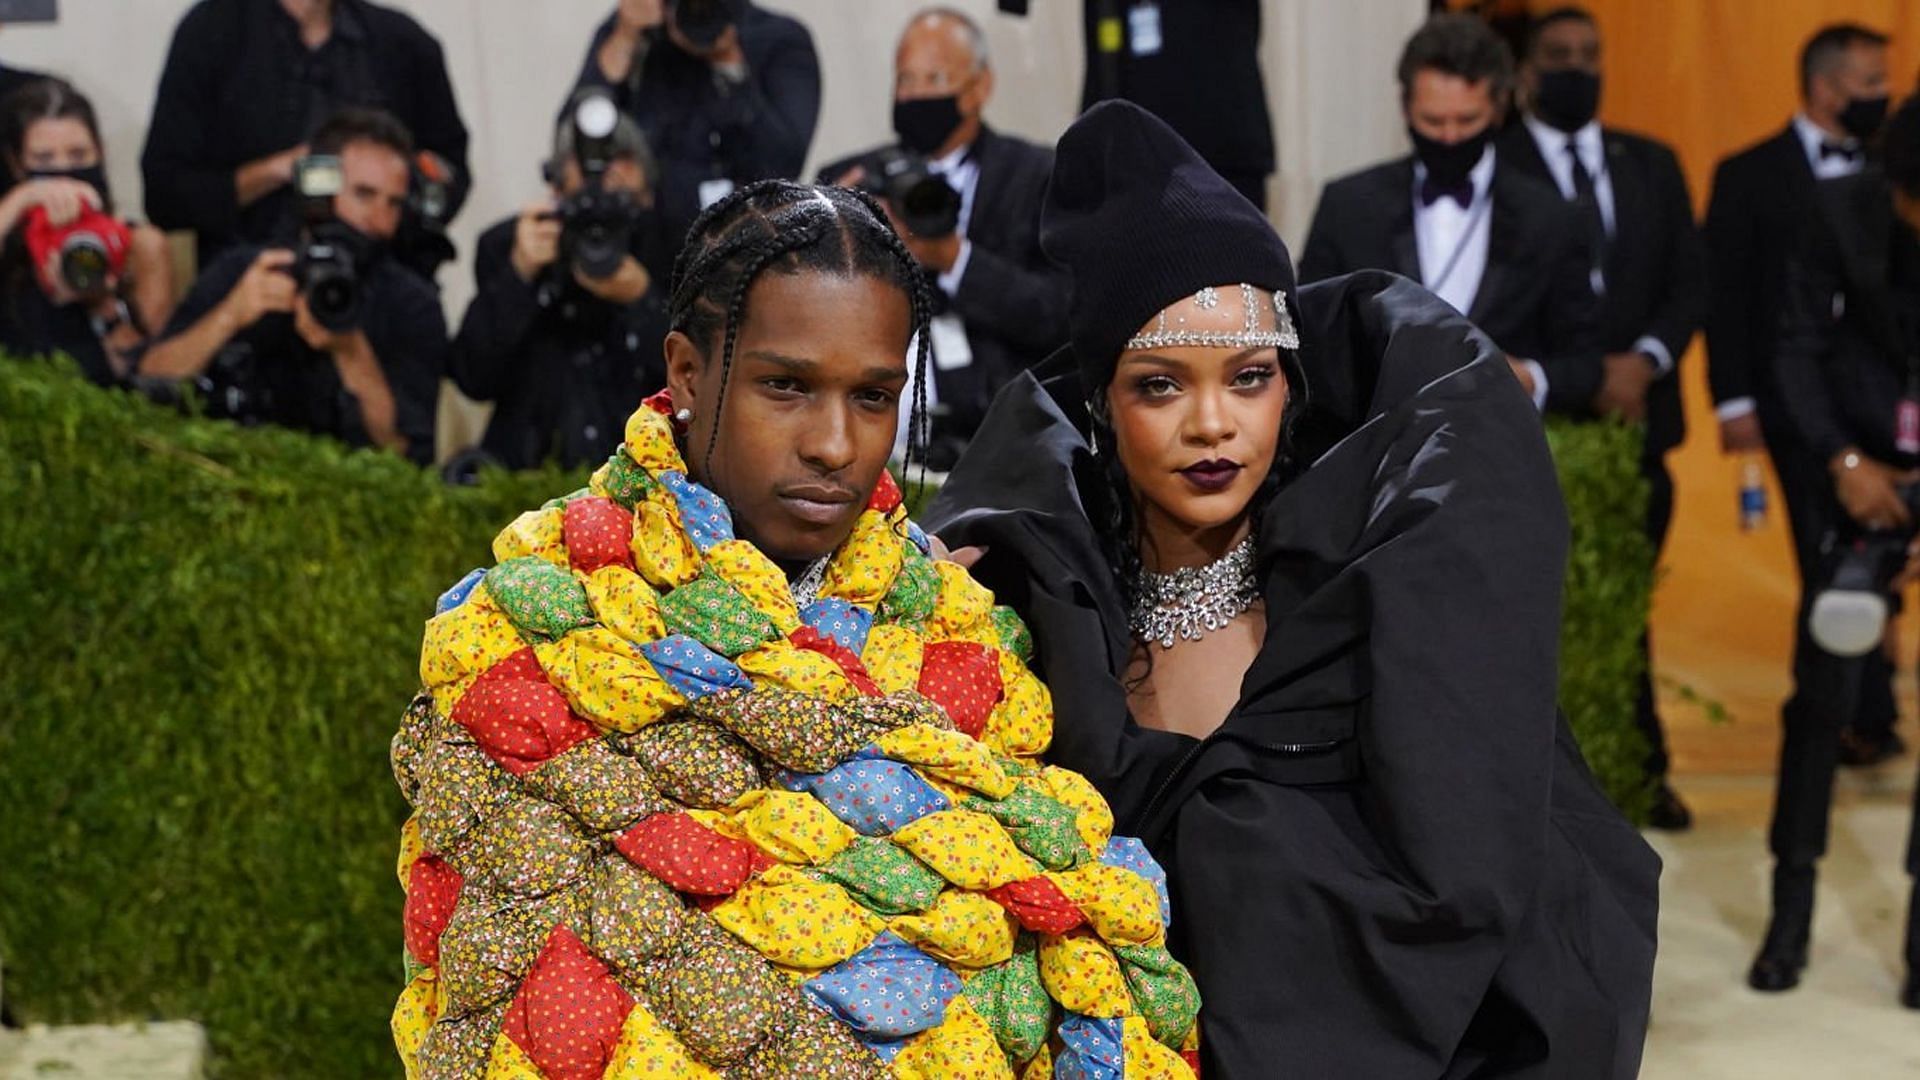 Rihanna and ASAP Rocky are expecting second child together (Image via Getty Images)